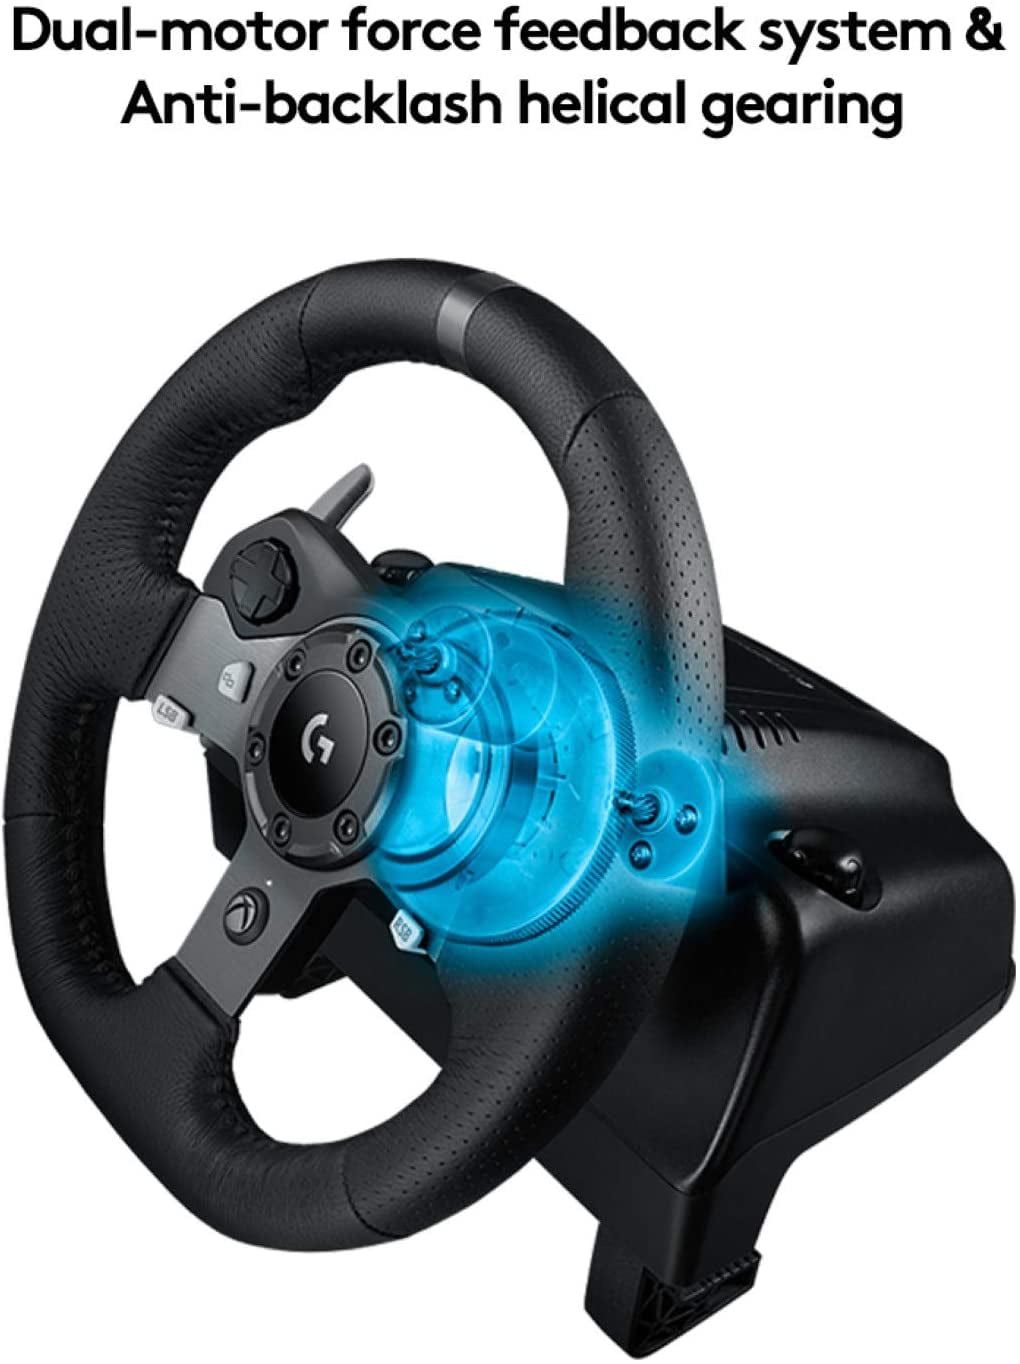 Logitech G920 Driving Force Racing Wheel and Floor Pedals, Real Force  Feedback, Stainless Steel Paddle Shifters, Leather Steering Wheel Cover for  Xbox Series X